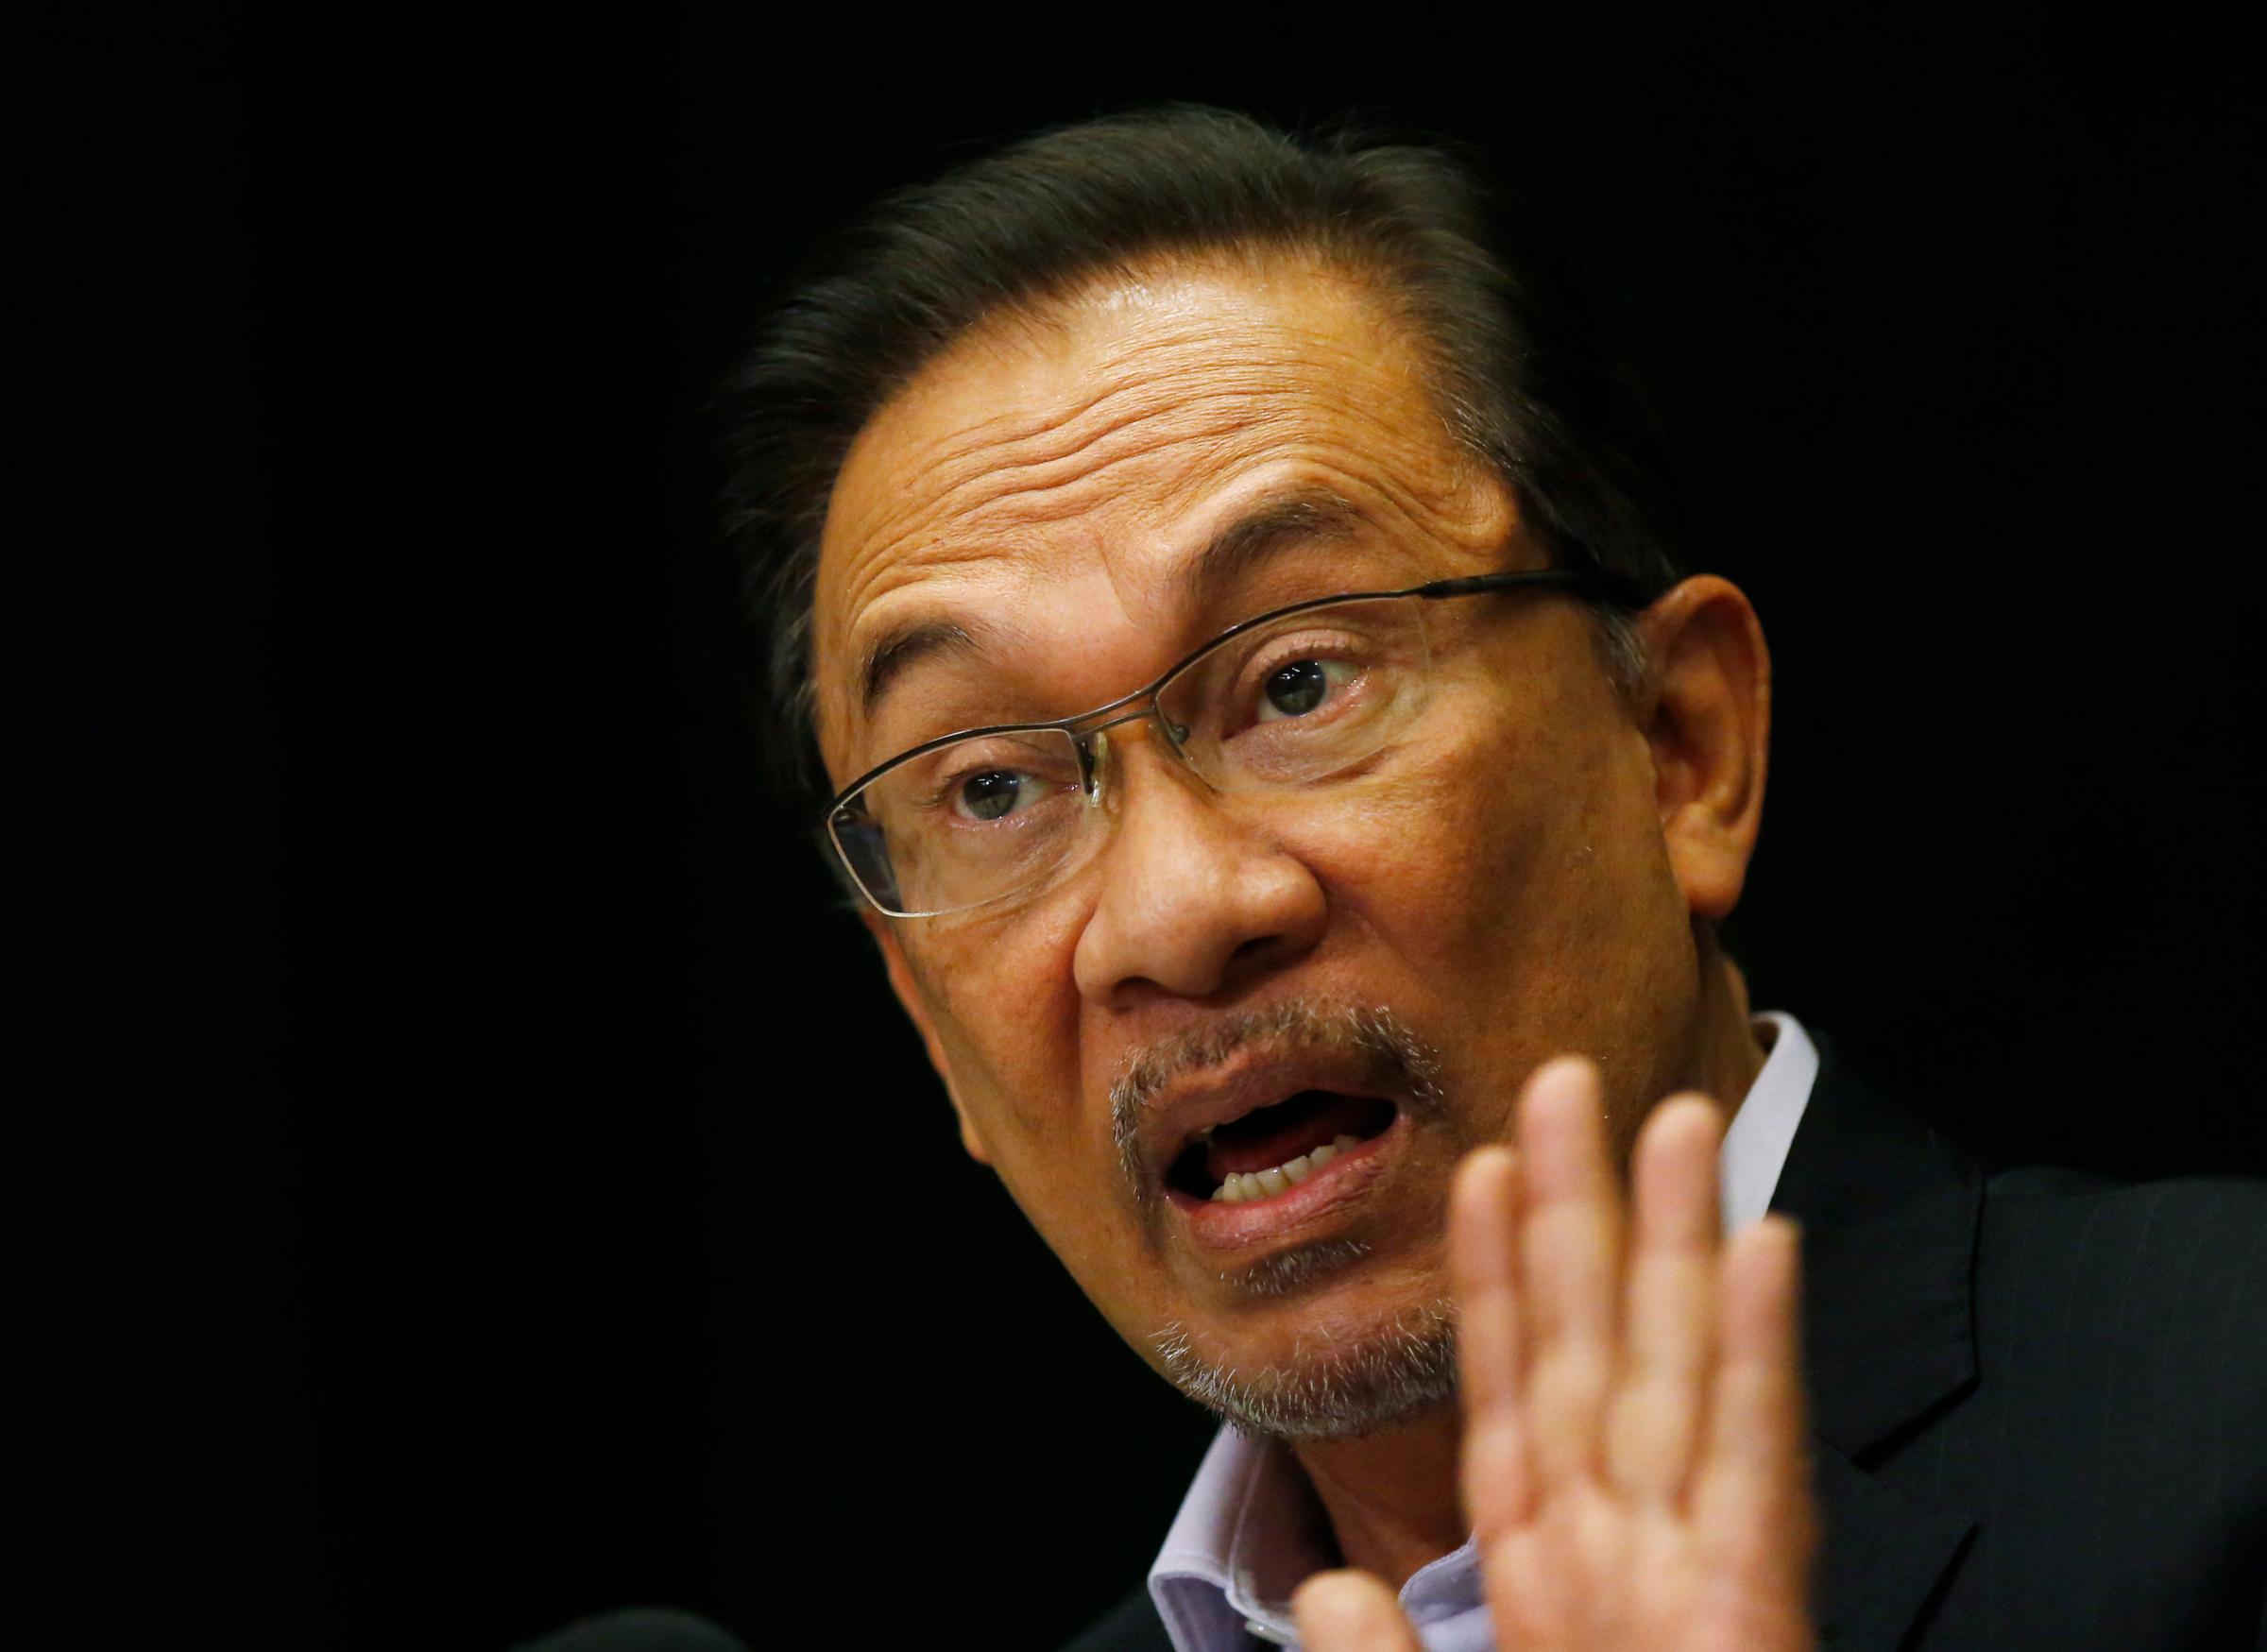 Malaysia's opposition leader Anwar Ibrahim speaks to the media ahead of the verdict in his final appeal against a conviction for sodomy in Kuala Lumpur